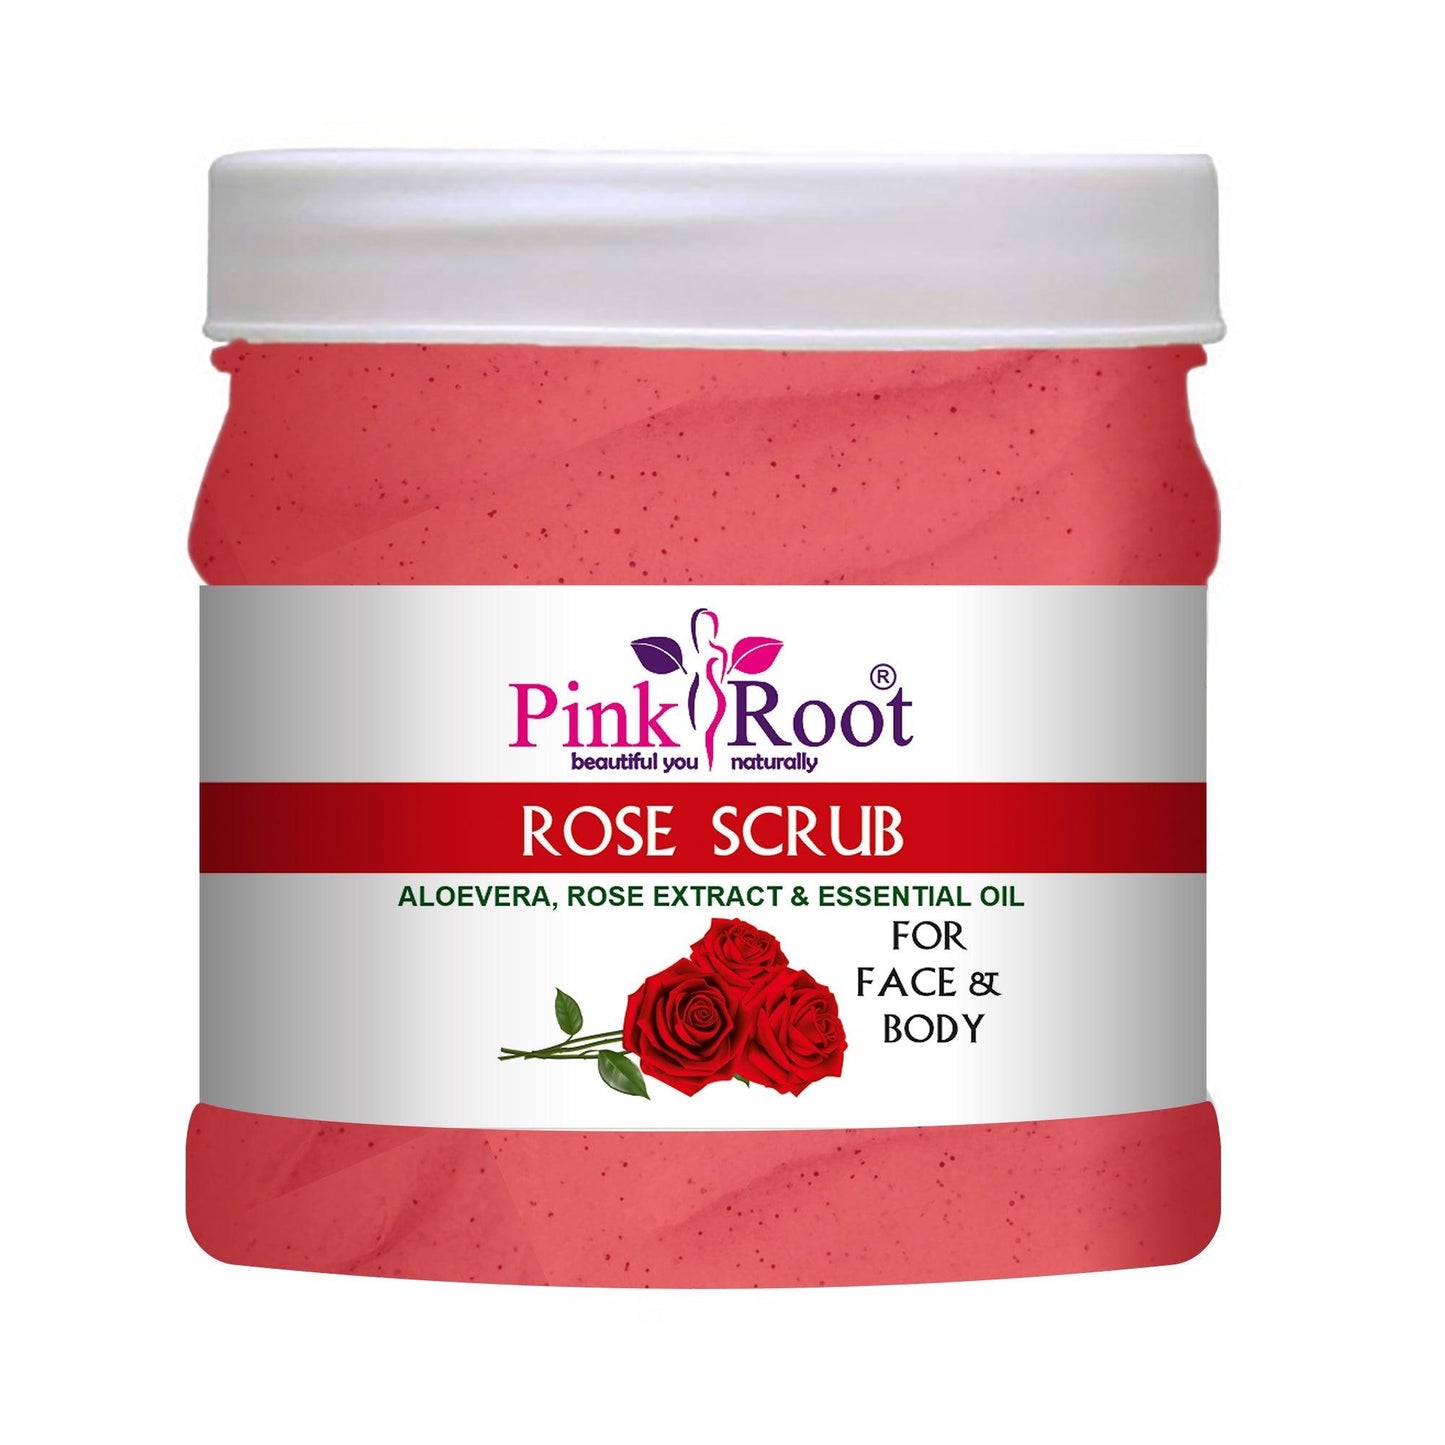 Rose Scrub for Face & Body with Rose petal extract. - Pink Root